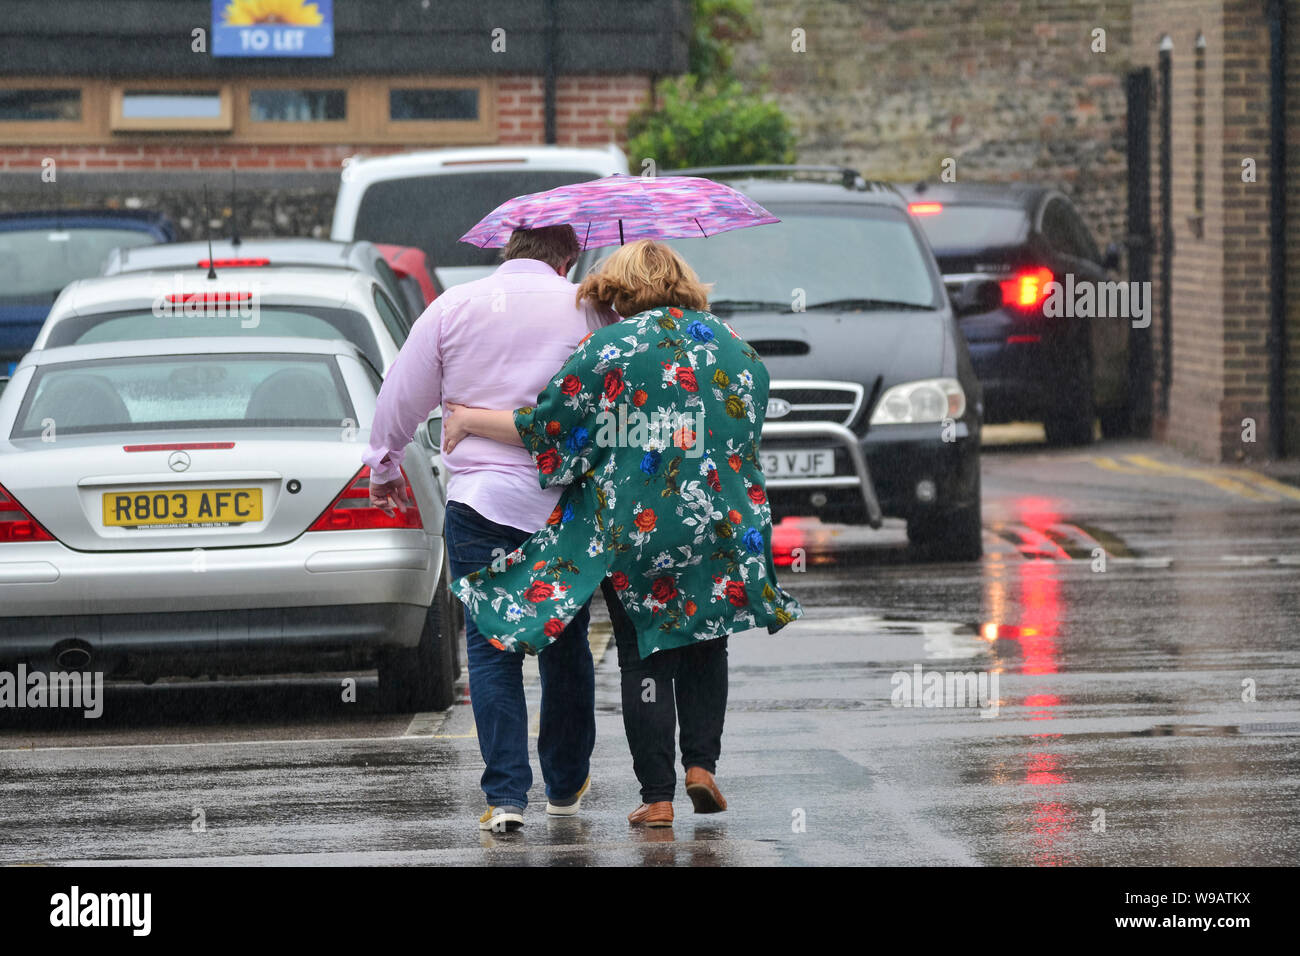 A couple of people caught out in the rain sharing an umbrella, heading for a car in a car park on a wet day in the UK. Raining in UK. Stock Photo